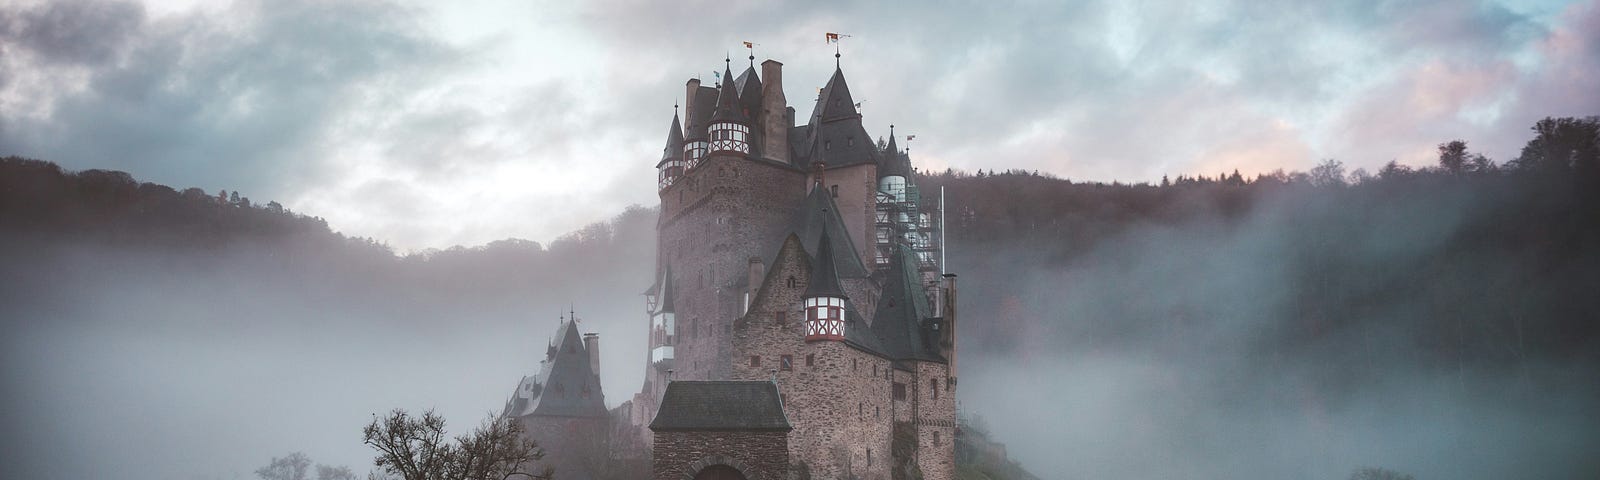 Castle in a hilly landscape surrounded by fog.